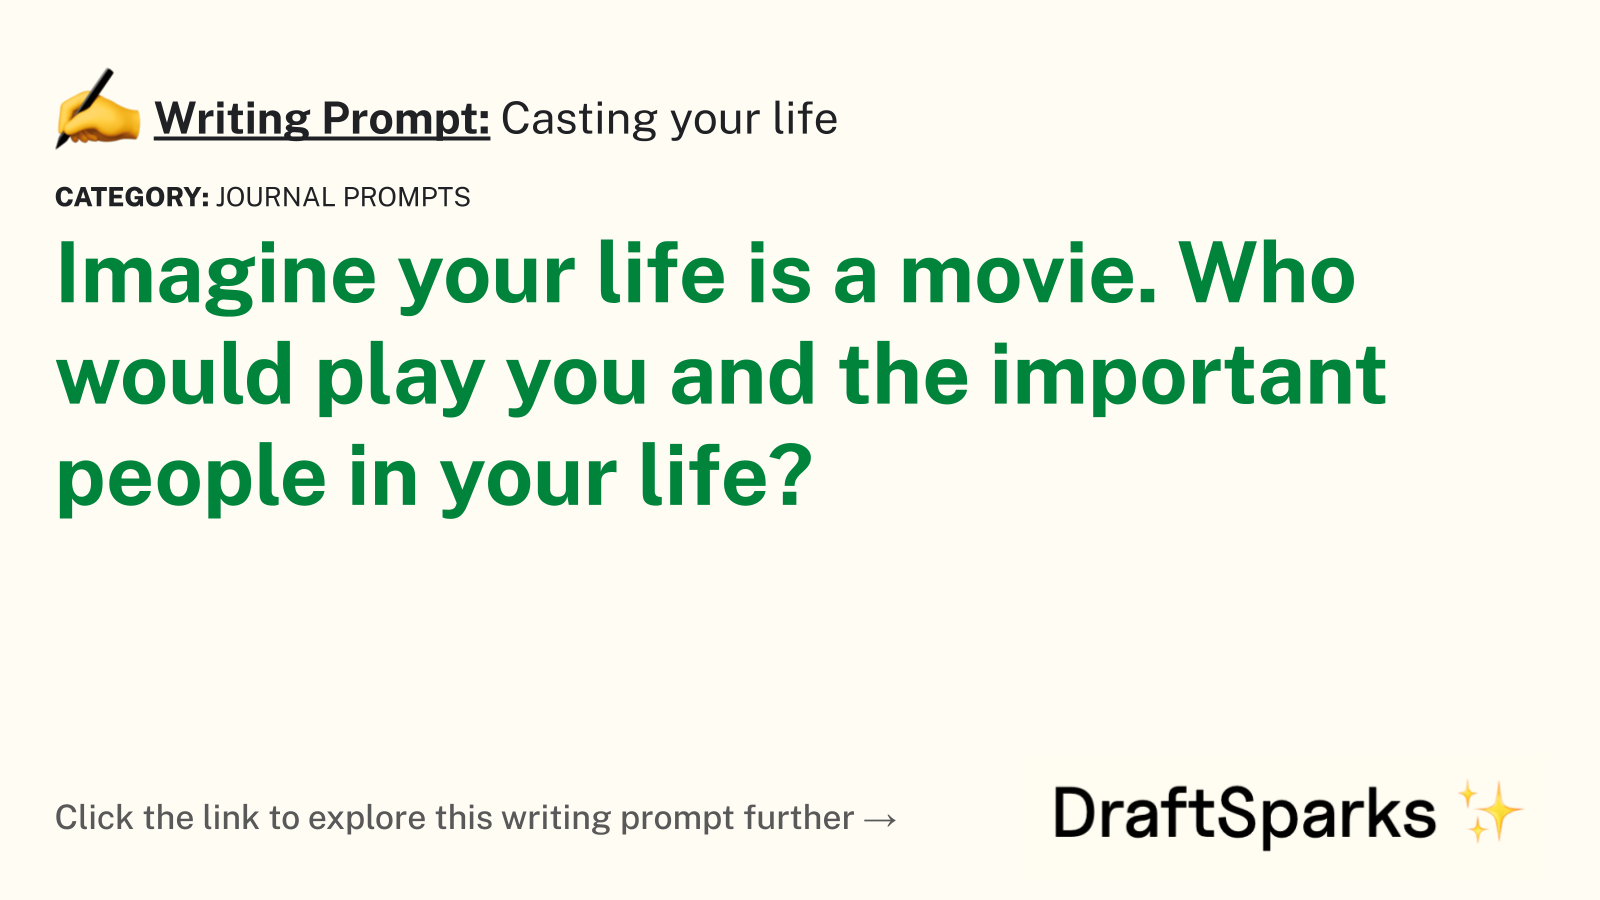 Casting your life